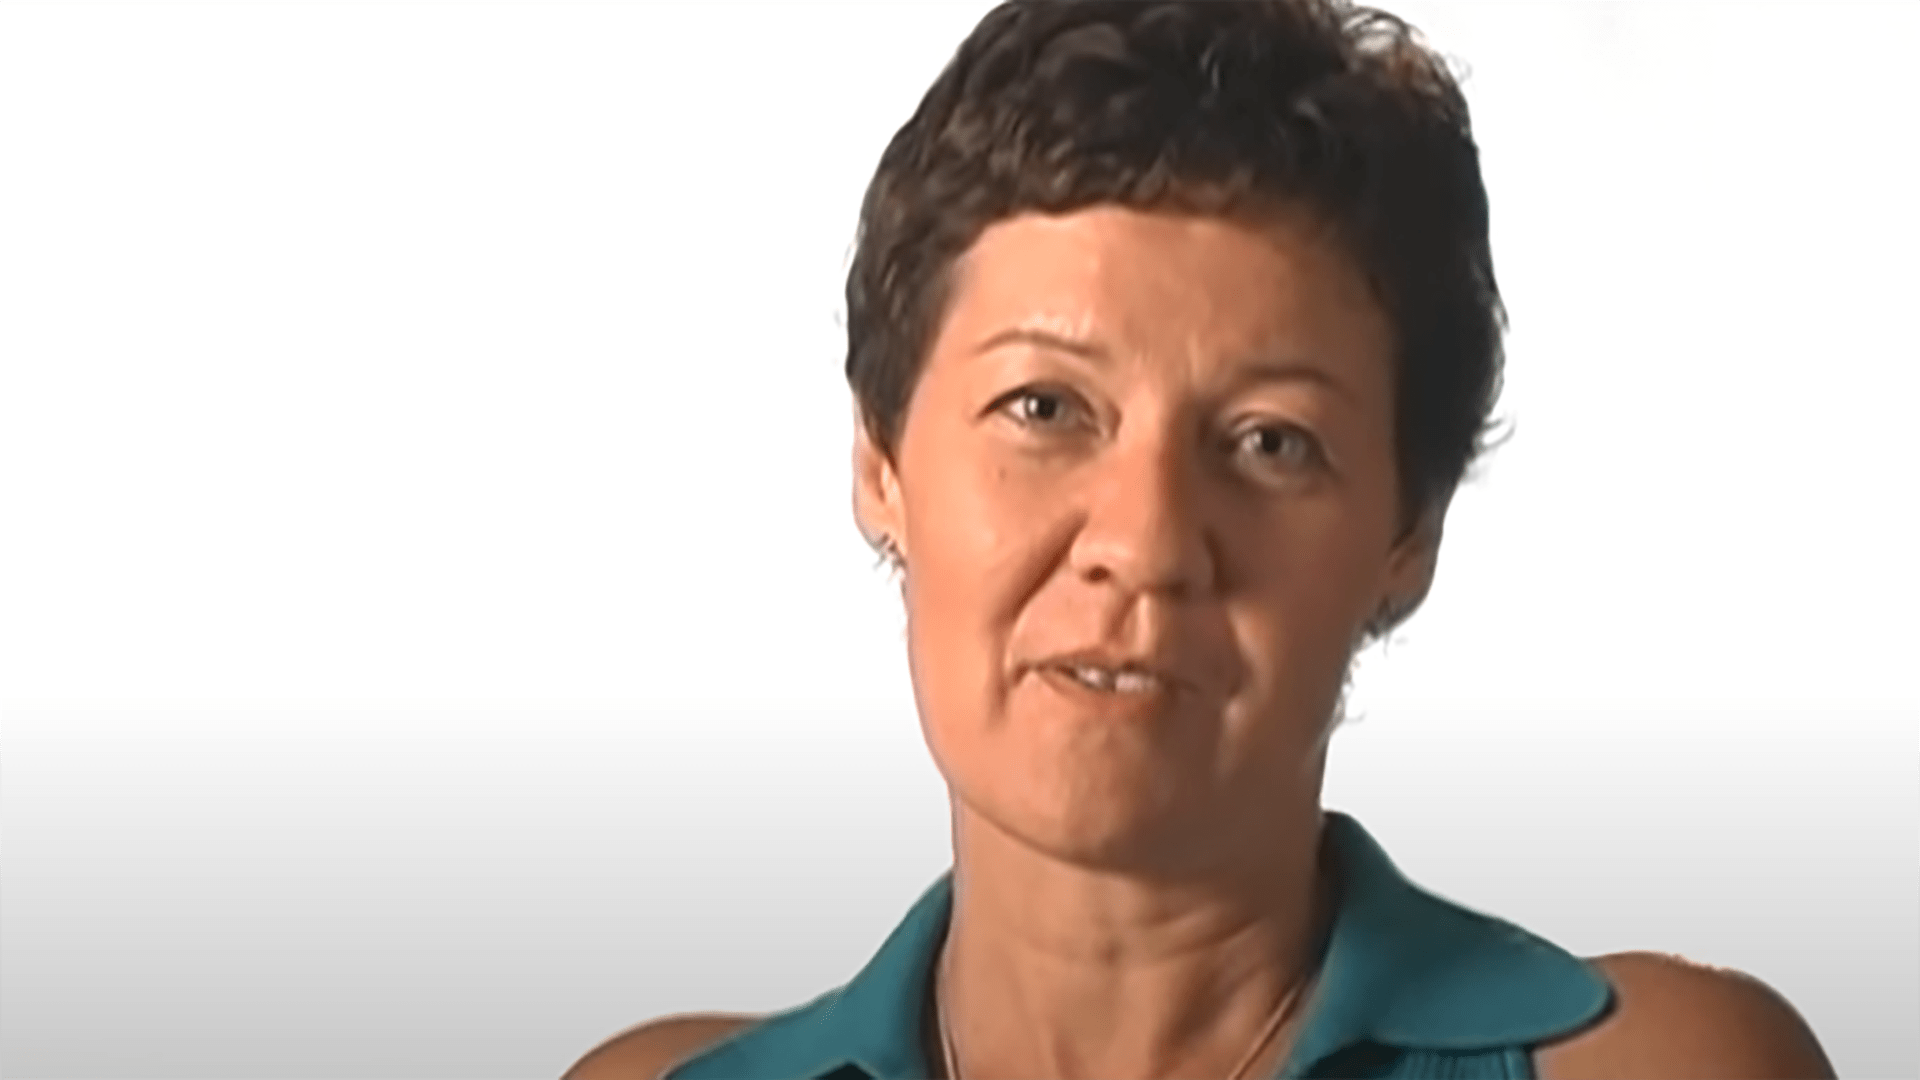 A middle aged woman with short hair and a teal shirt is interviewed against a white background